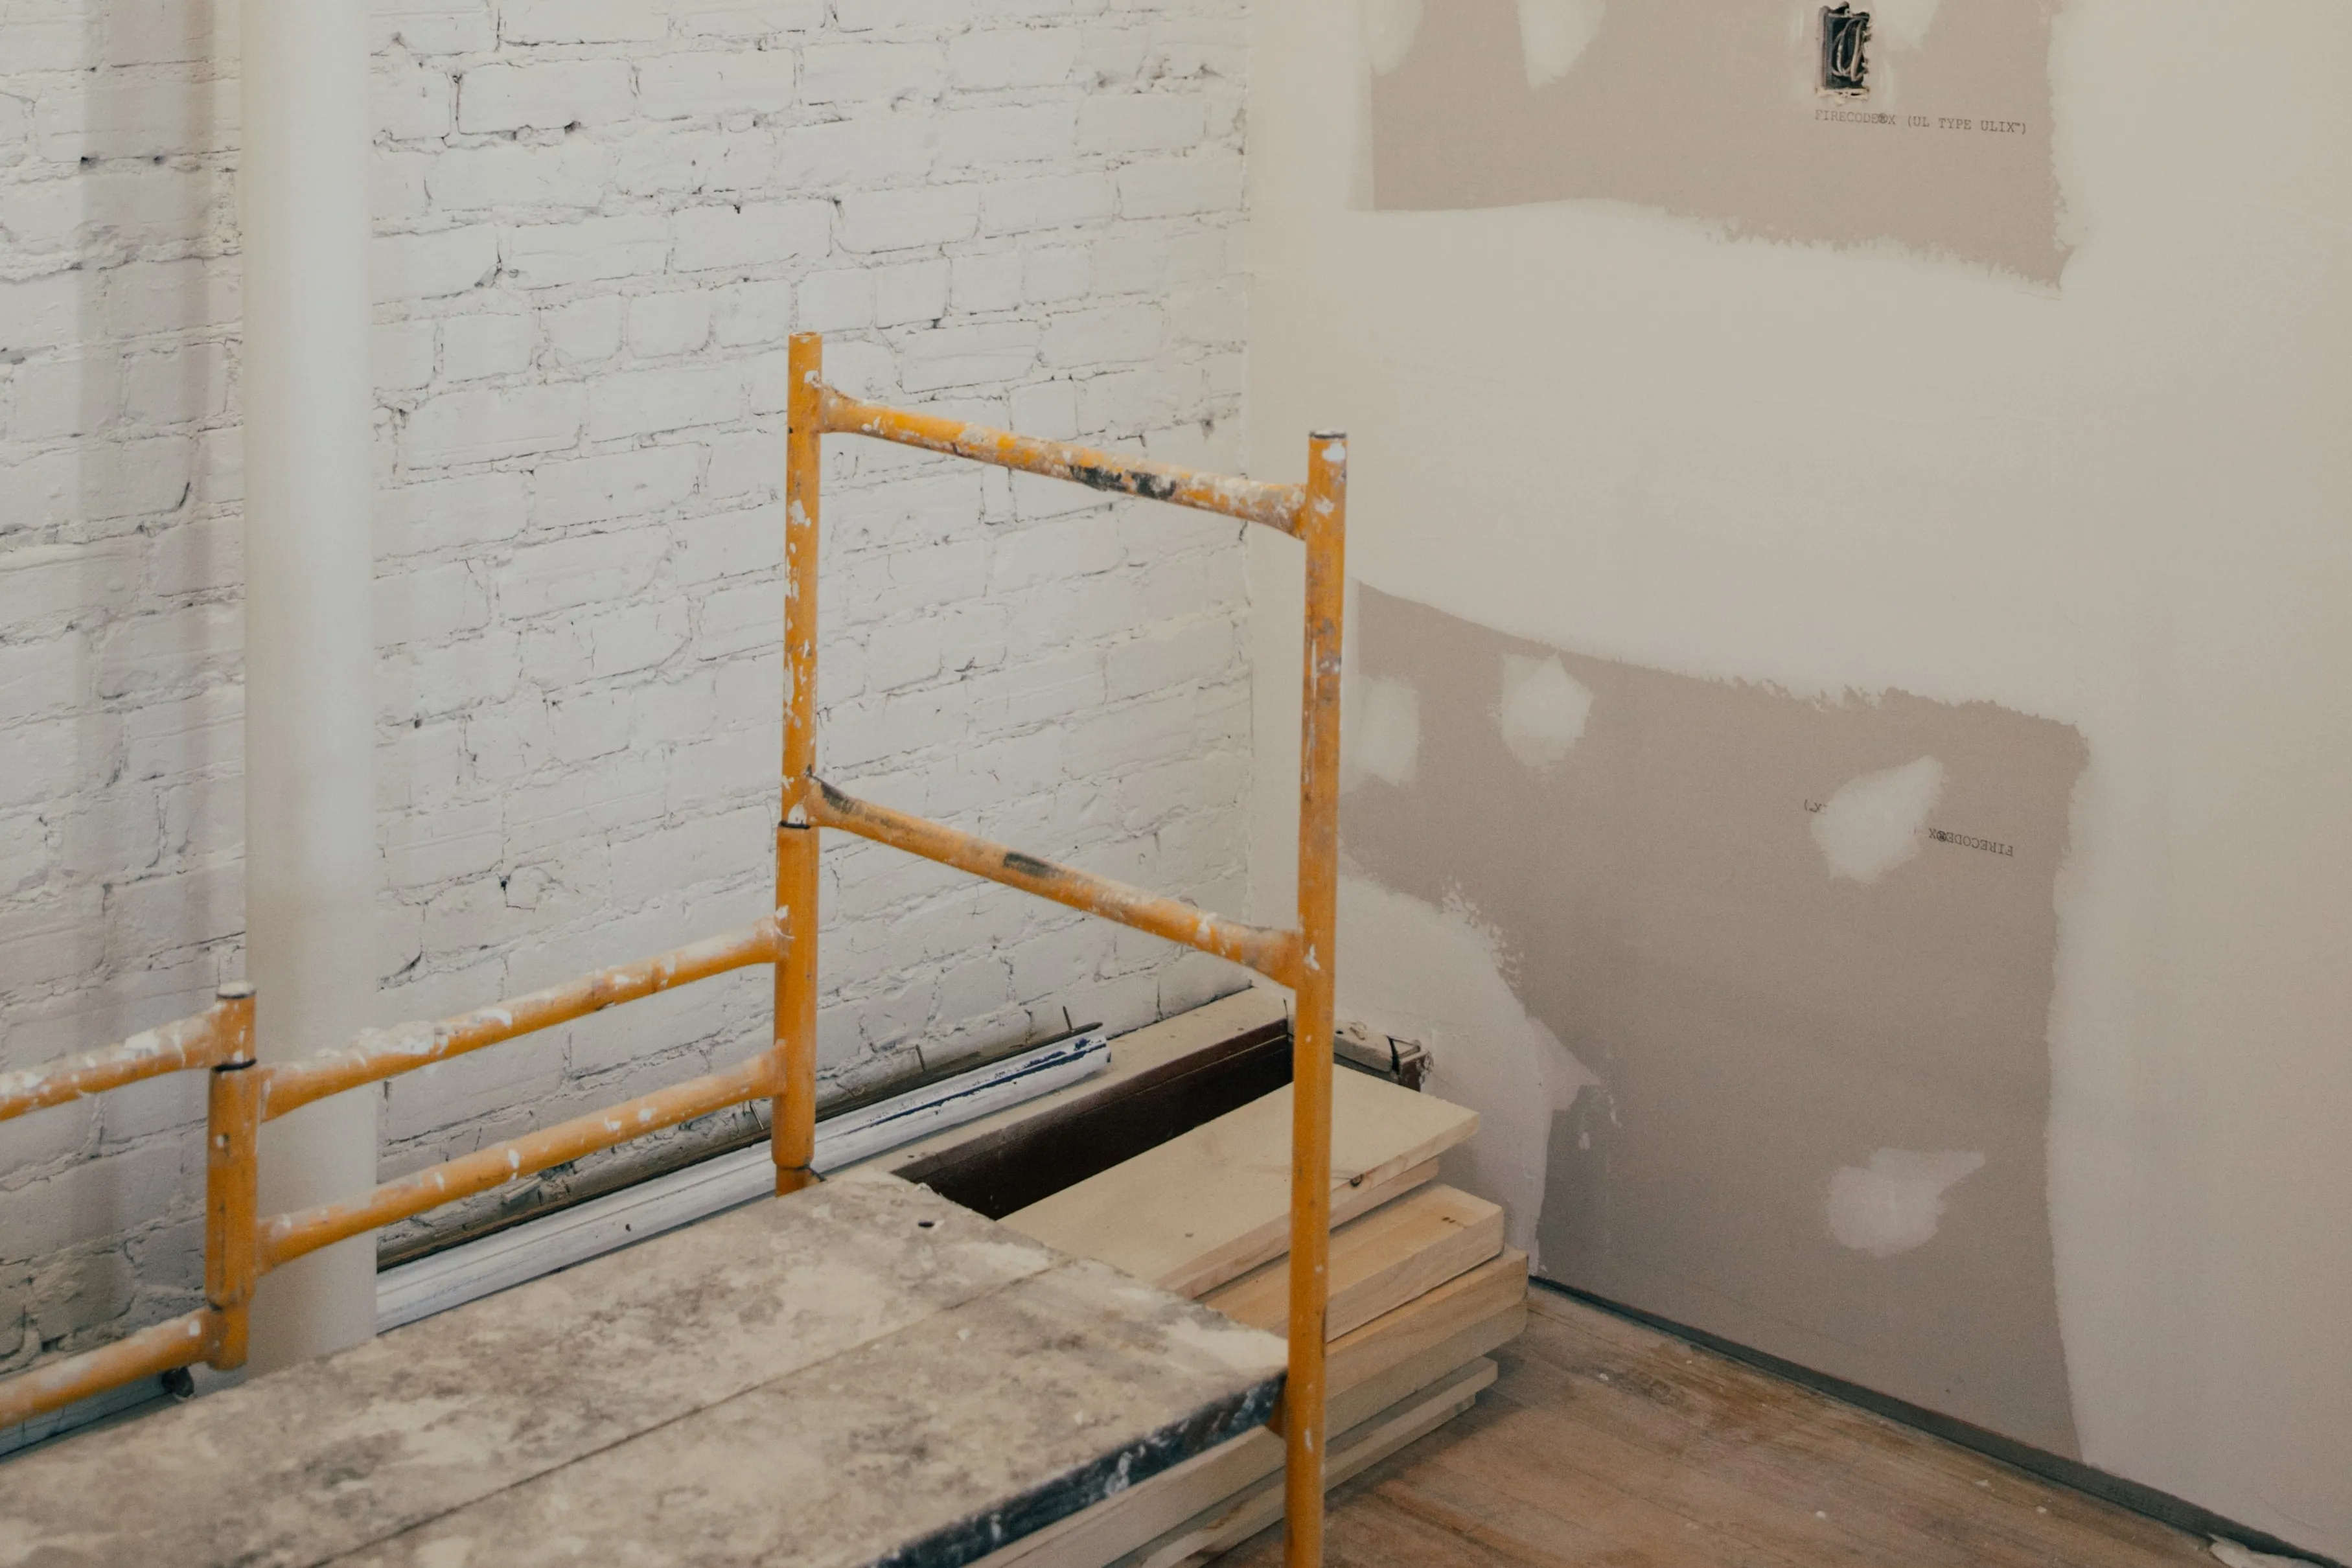 Drywall Repairs & Installation for 911 Houston Painters, LLC in Houston, TX